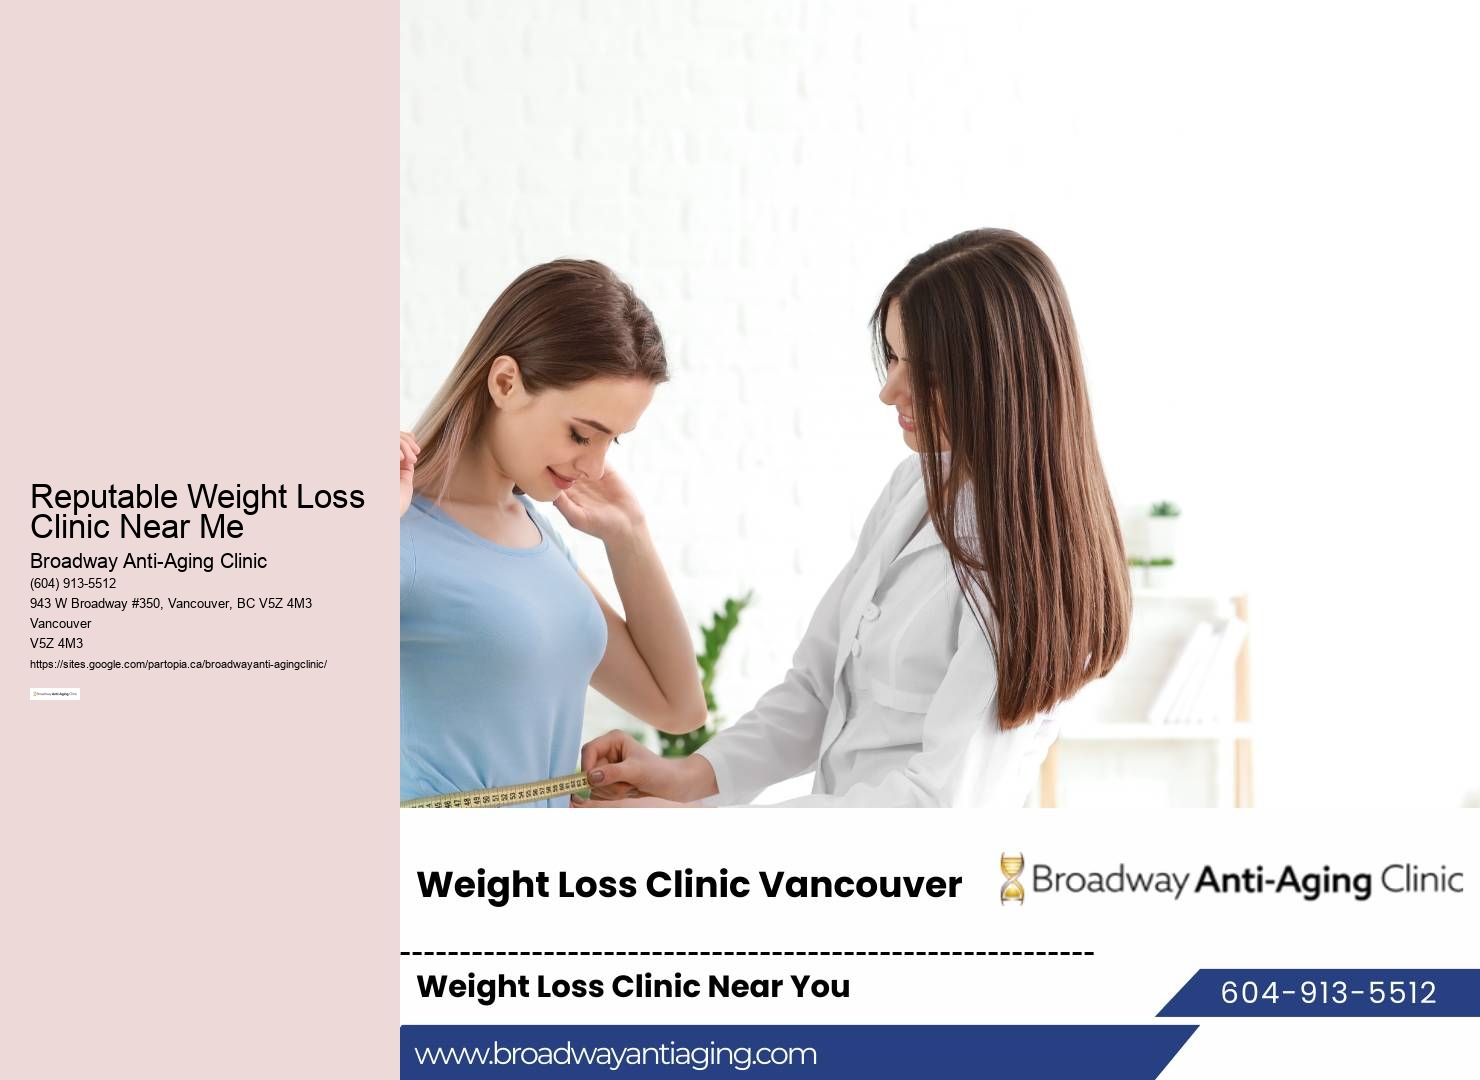 Reputable Weight Loss Clinic Near Me